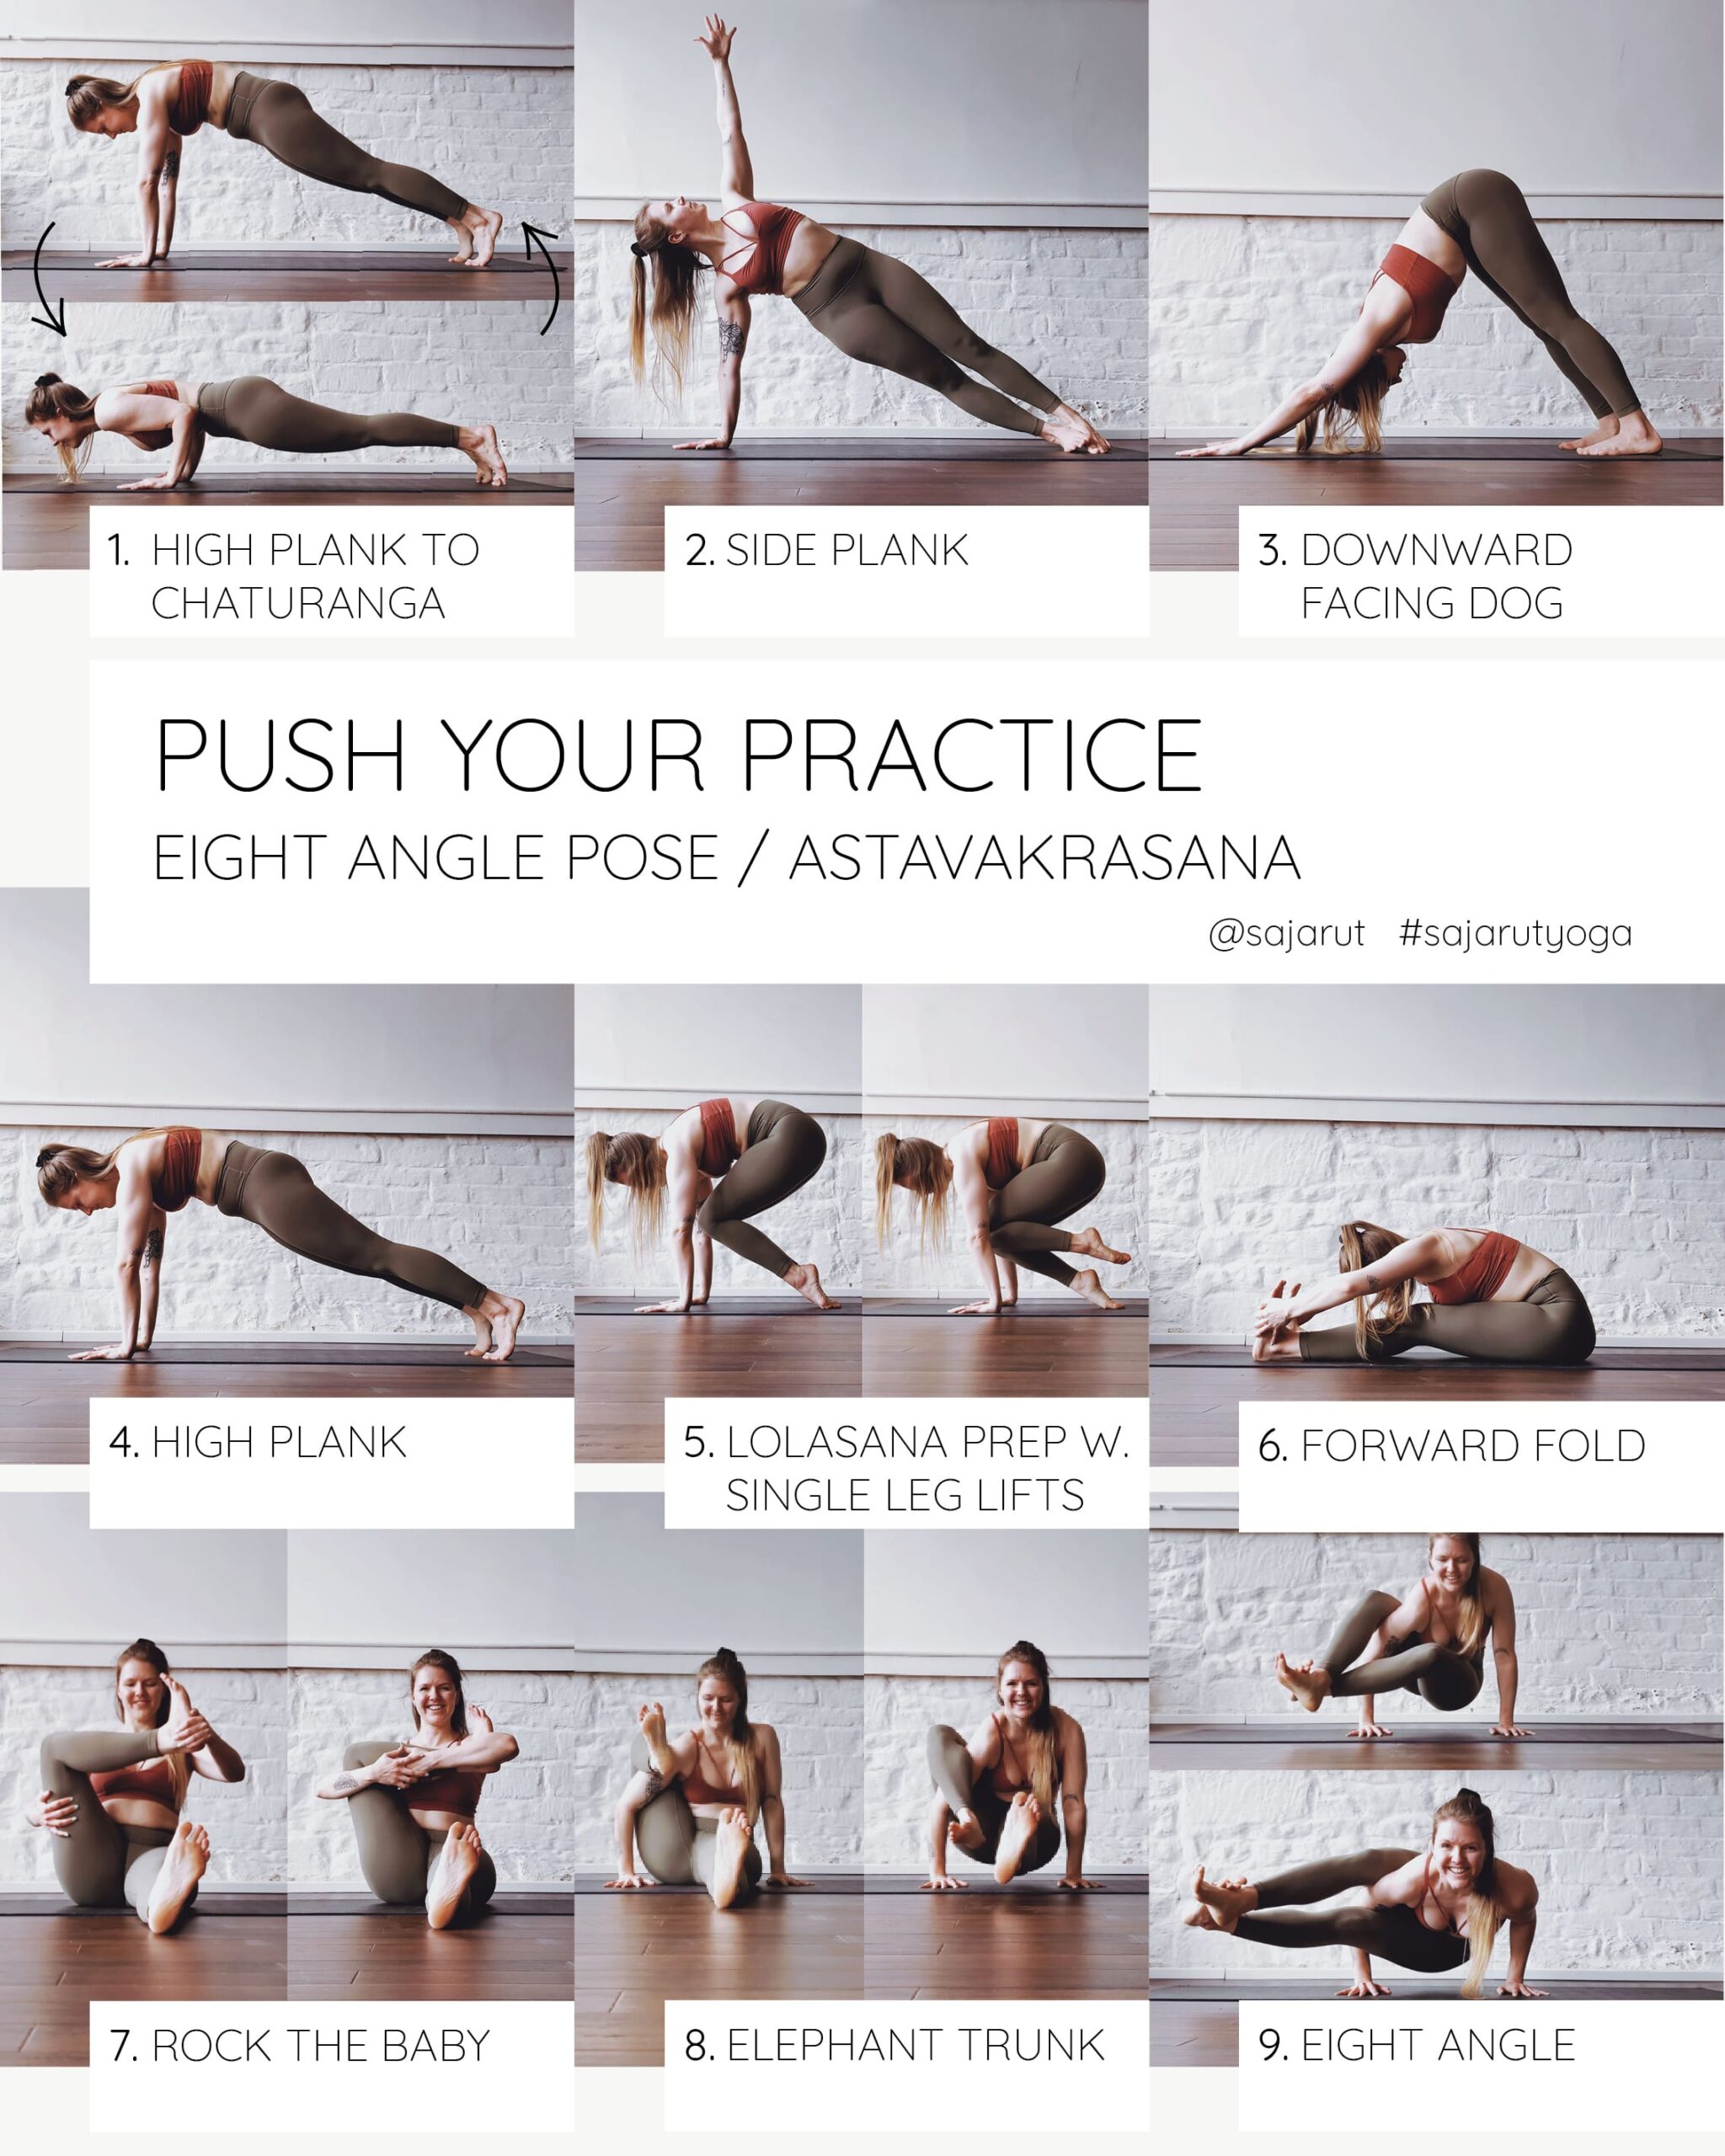 Yoga Poses for Beginners: 5 Basic Poses to Get You Started